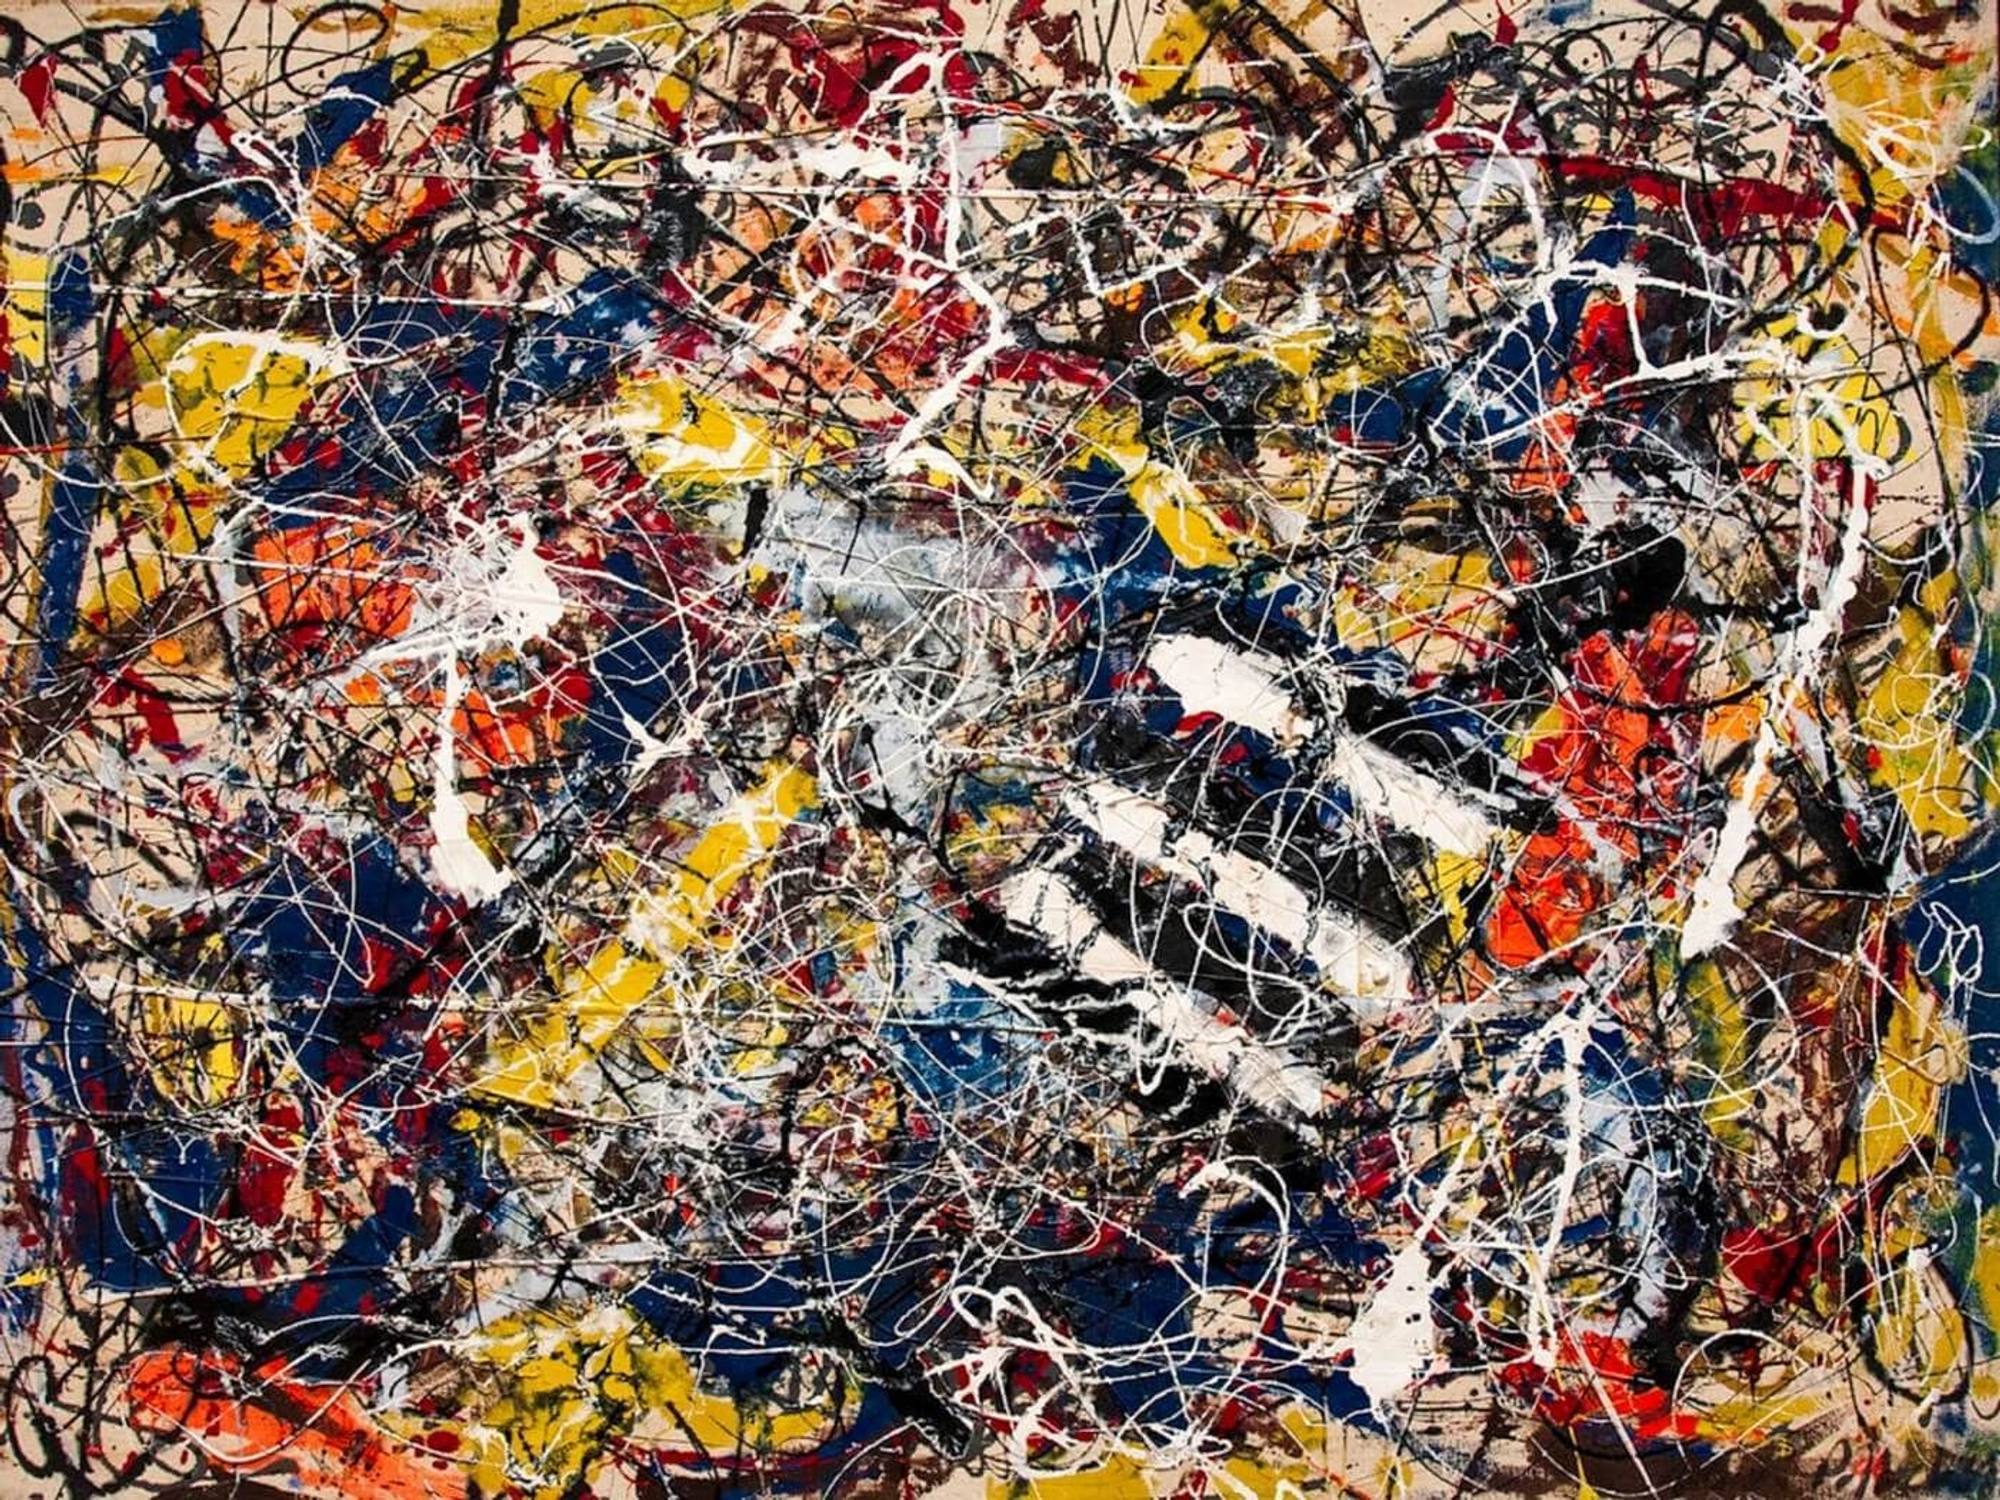 Number 17a by Jackson Pollock cost a whopping $500 million